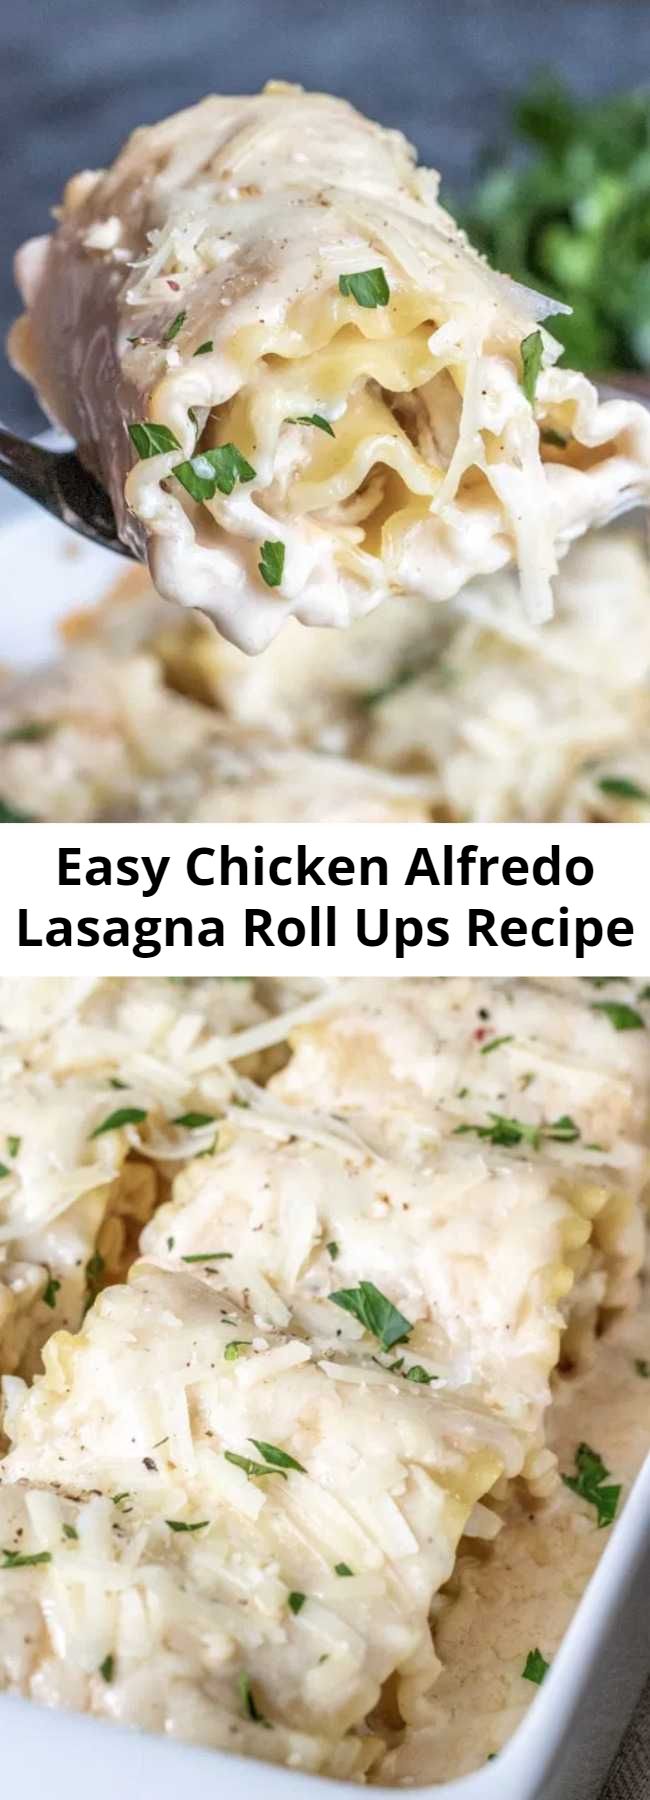 Easy Chicken Alfredo Lasagna Roll Ups Recipe - These Chicken Alfredo Lasagna Roll Ups are all of the flavors of classic Chicken Alfredo rolled up into lasagna noodles to make easy lasagna rolls. A simple weeknight dinner recipe that the whole family will love. #lasagna #chickenalfredo #pasta #casserole